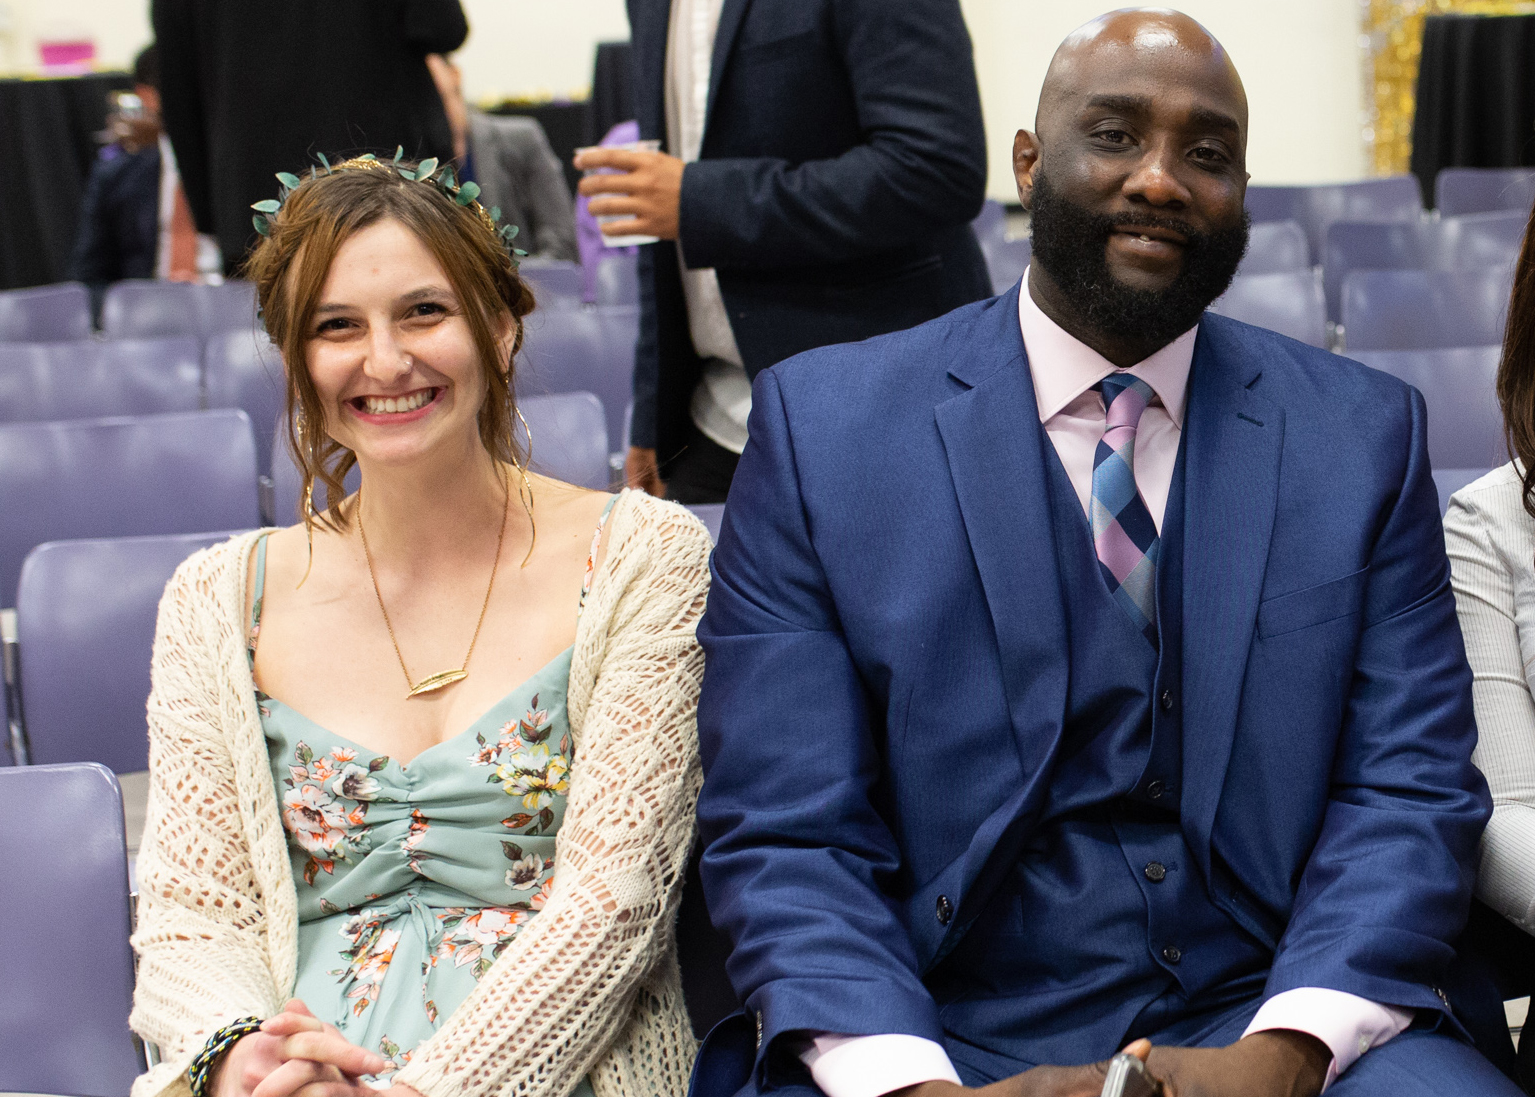 Katya Zinn and Tyrell Dortch are seated next to each other and smiling at the camera.